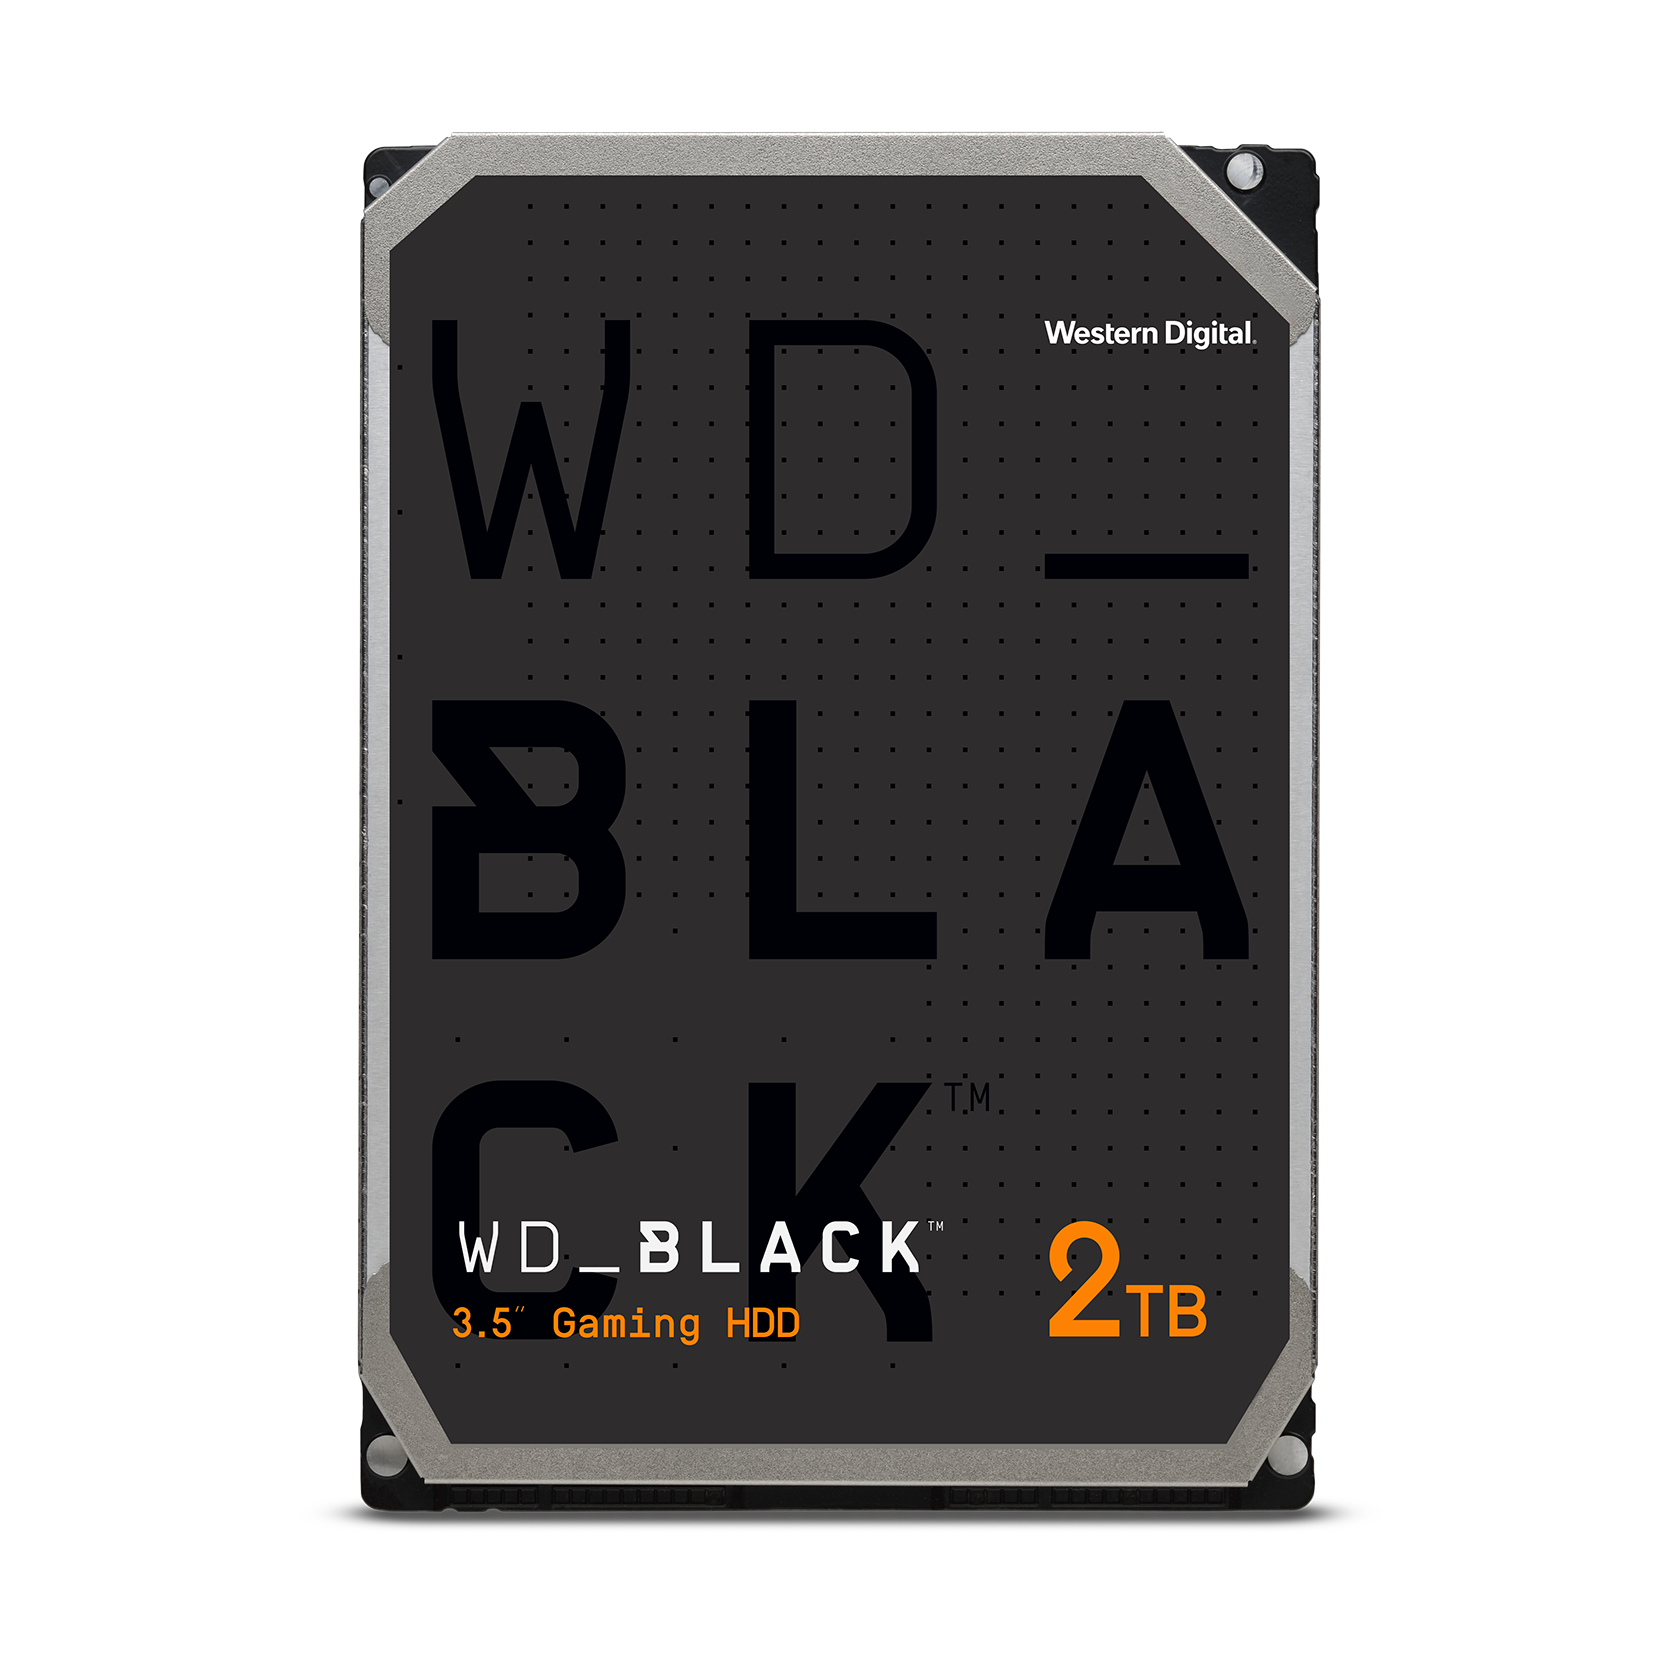 WD_BLACK 2TB 3.5'' Internal Gaming Hard Drive, 64MB Cache - WD2003FZEX - image 2 of 5